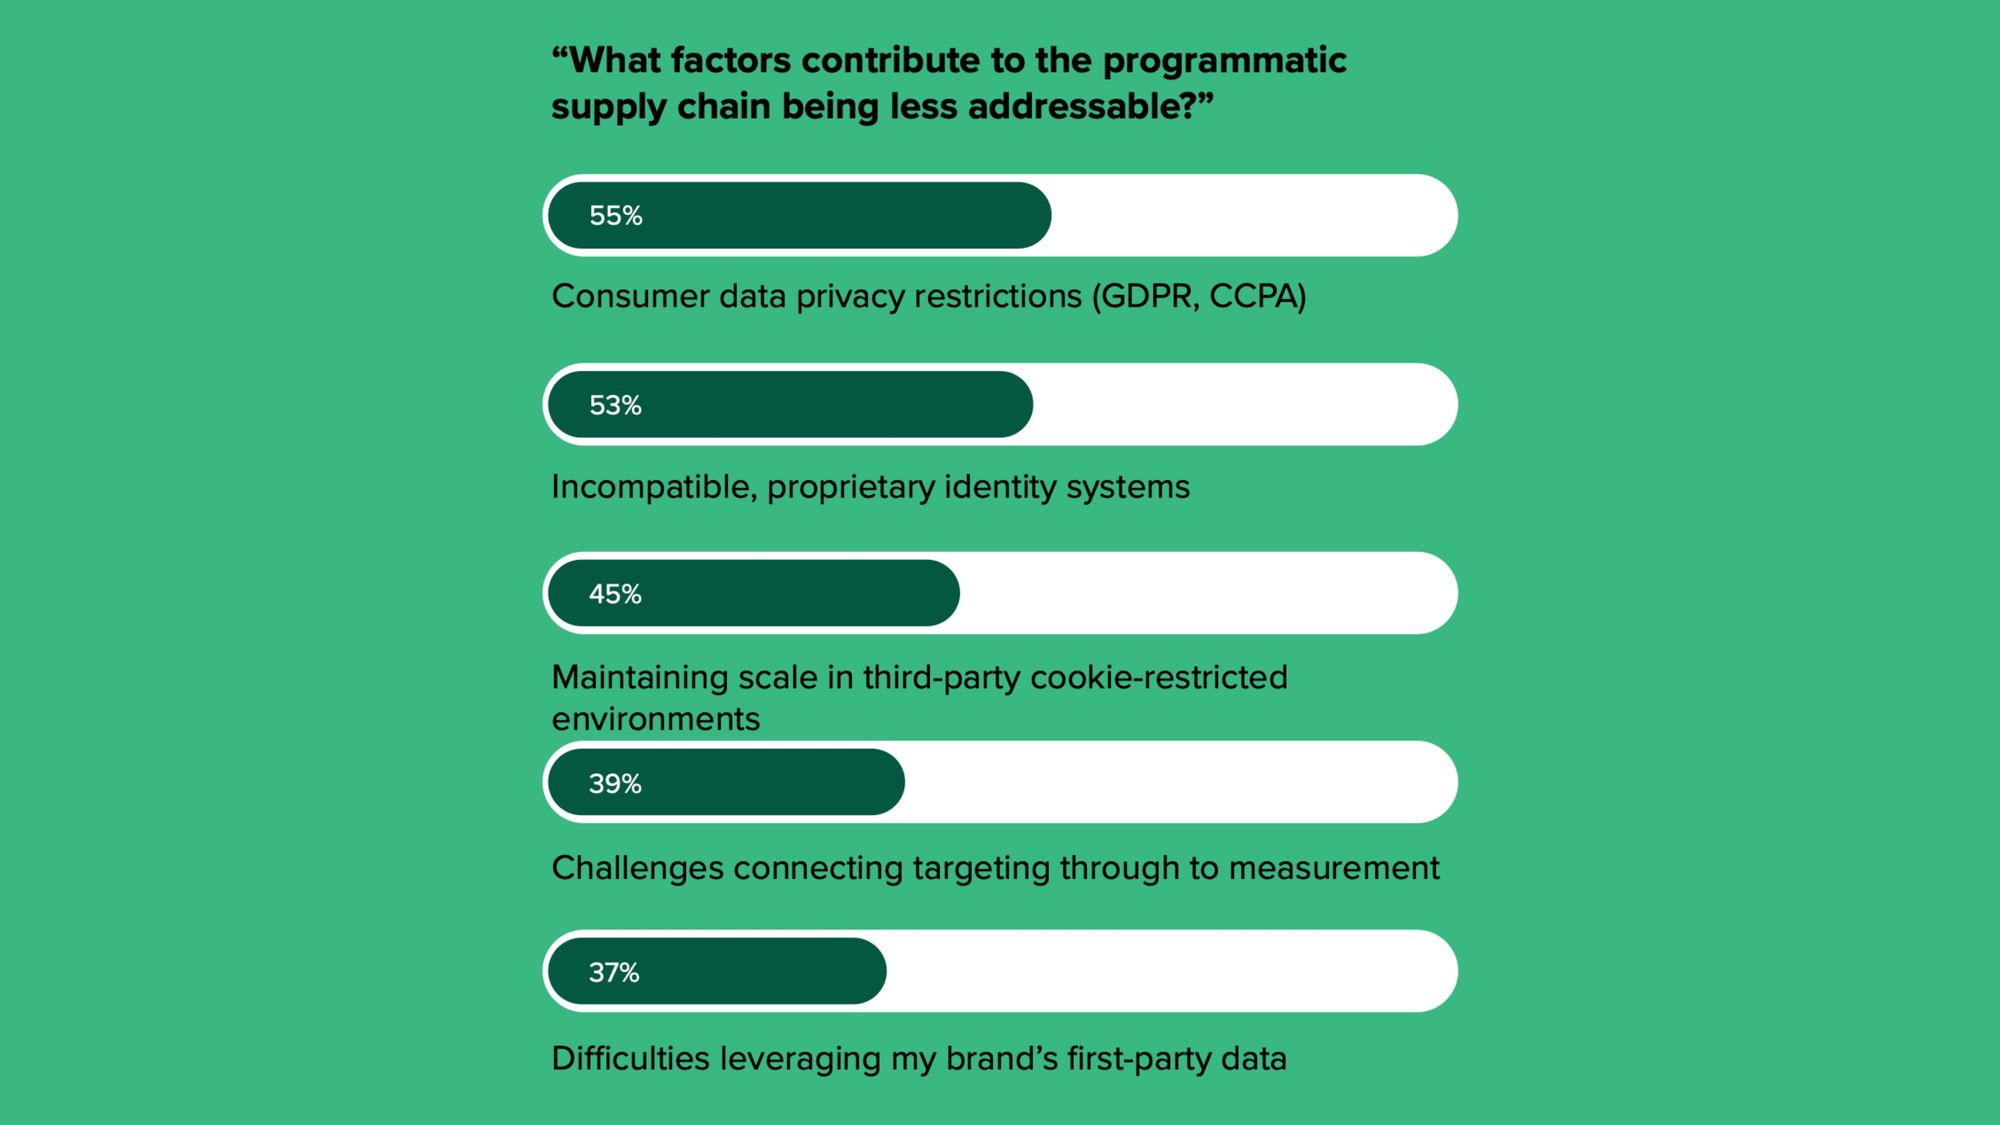 45% marketer’s struggle to maintain scale in third-party-cookie-restricted environments